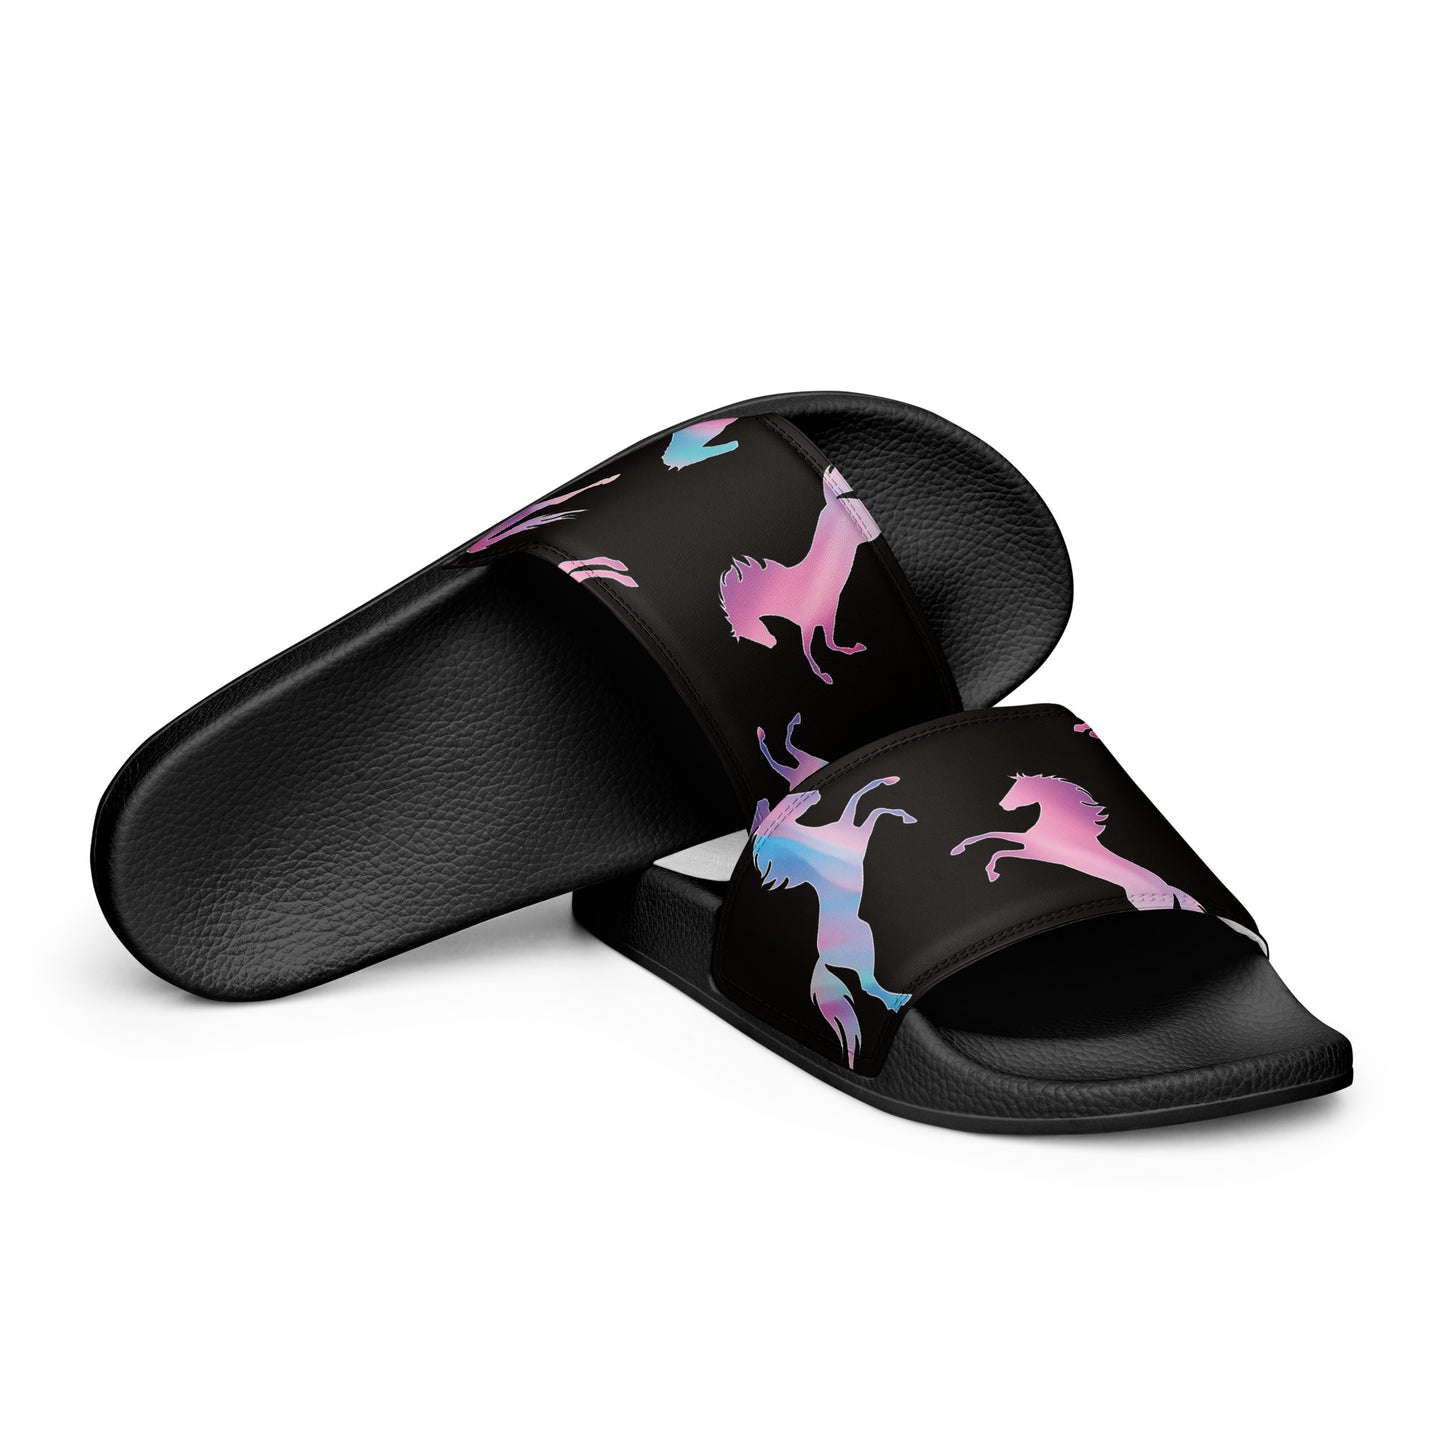 Horses by the Sea 954 Signature Women's slides